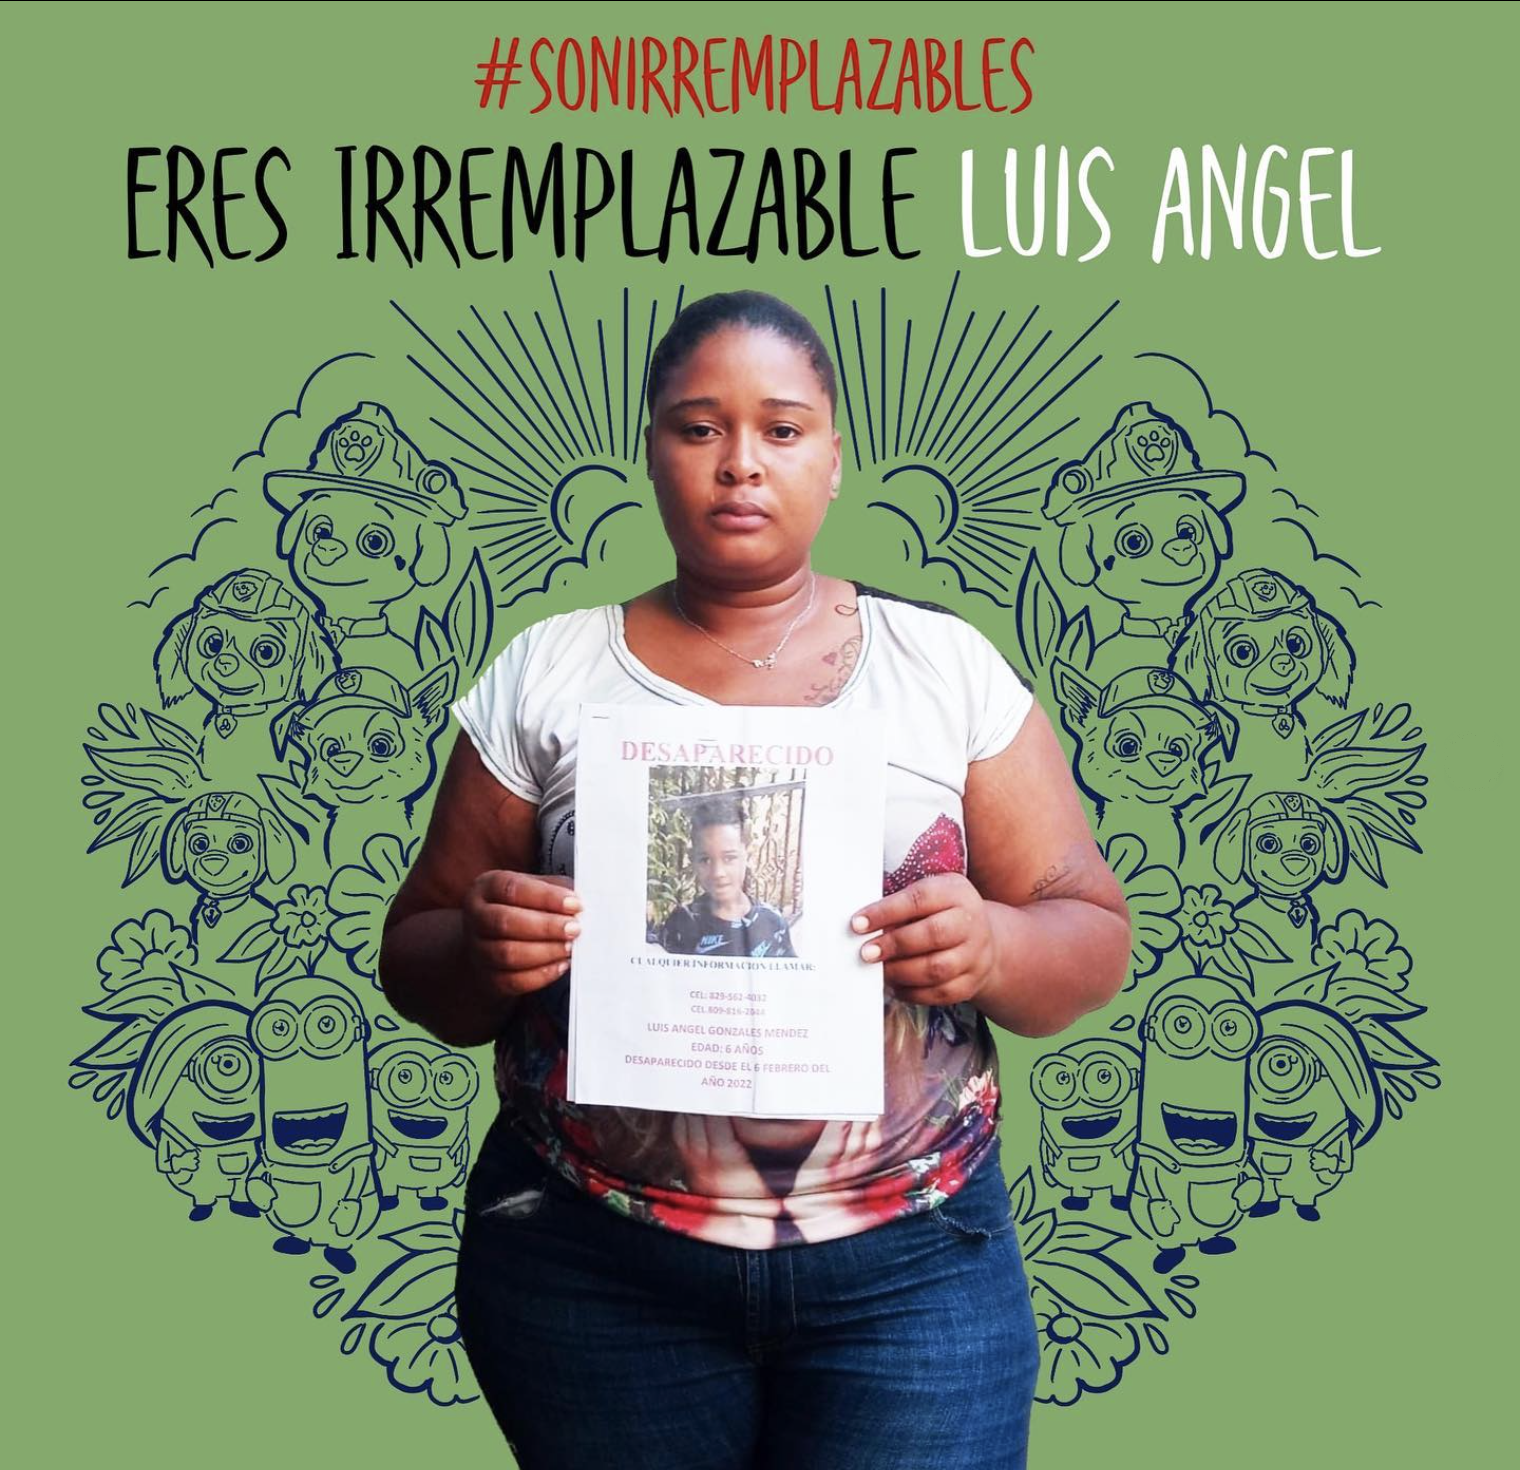 Honorary post for missing person Luis Angel, a person holds up a photo of Luis Angel against a decorative green background